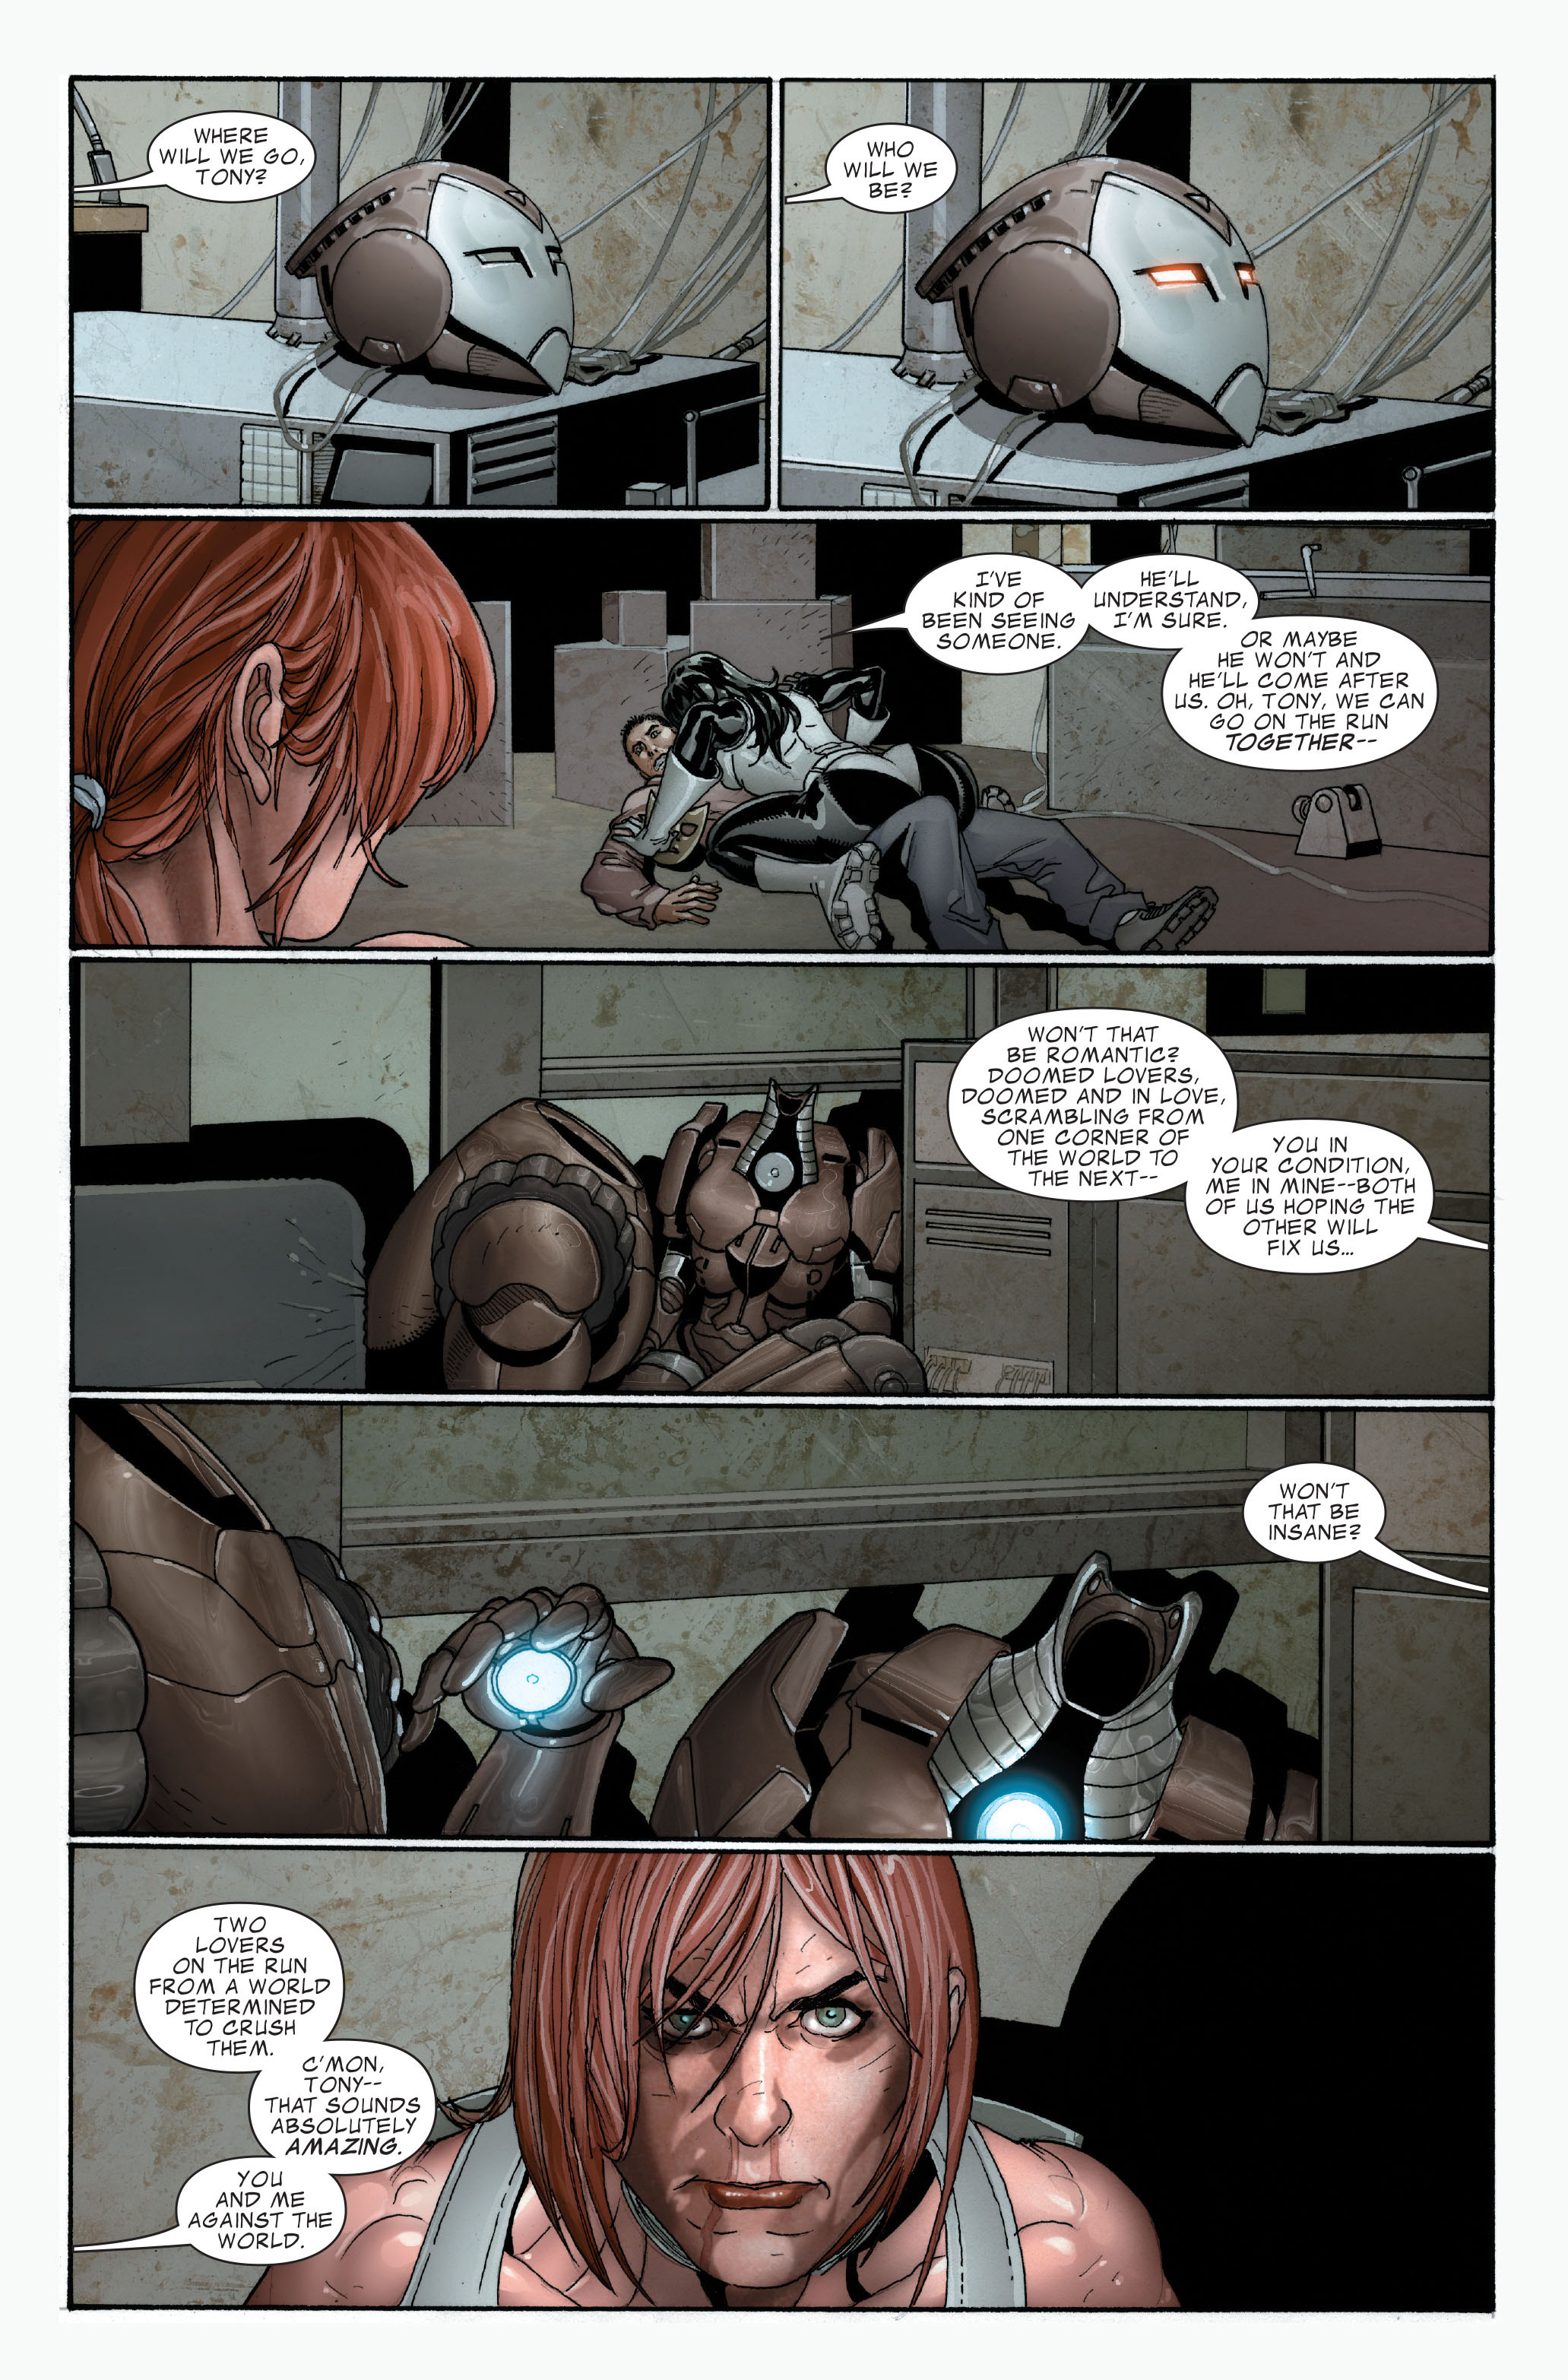 Invincible Iron Man (2008) 16 Page 4